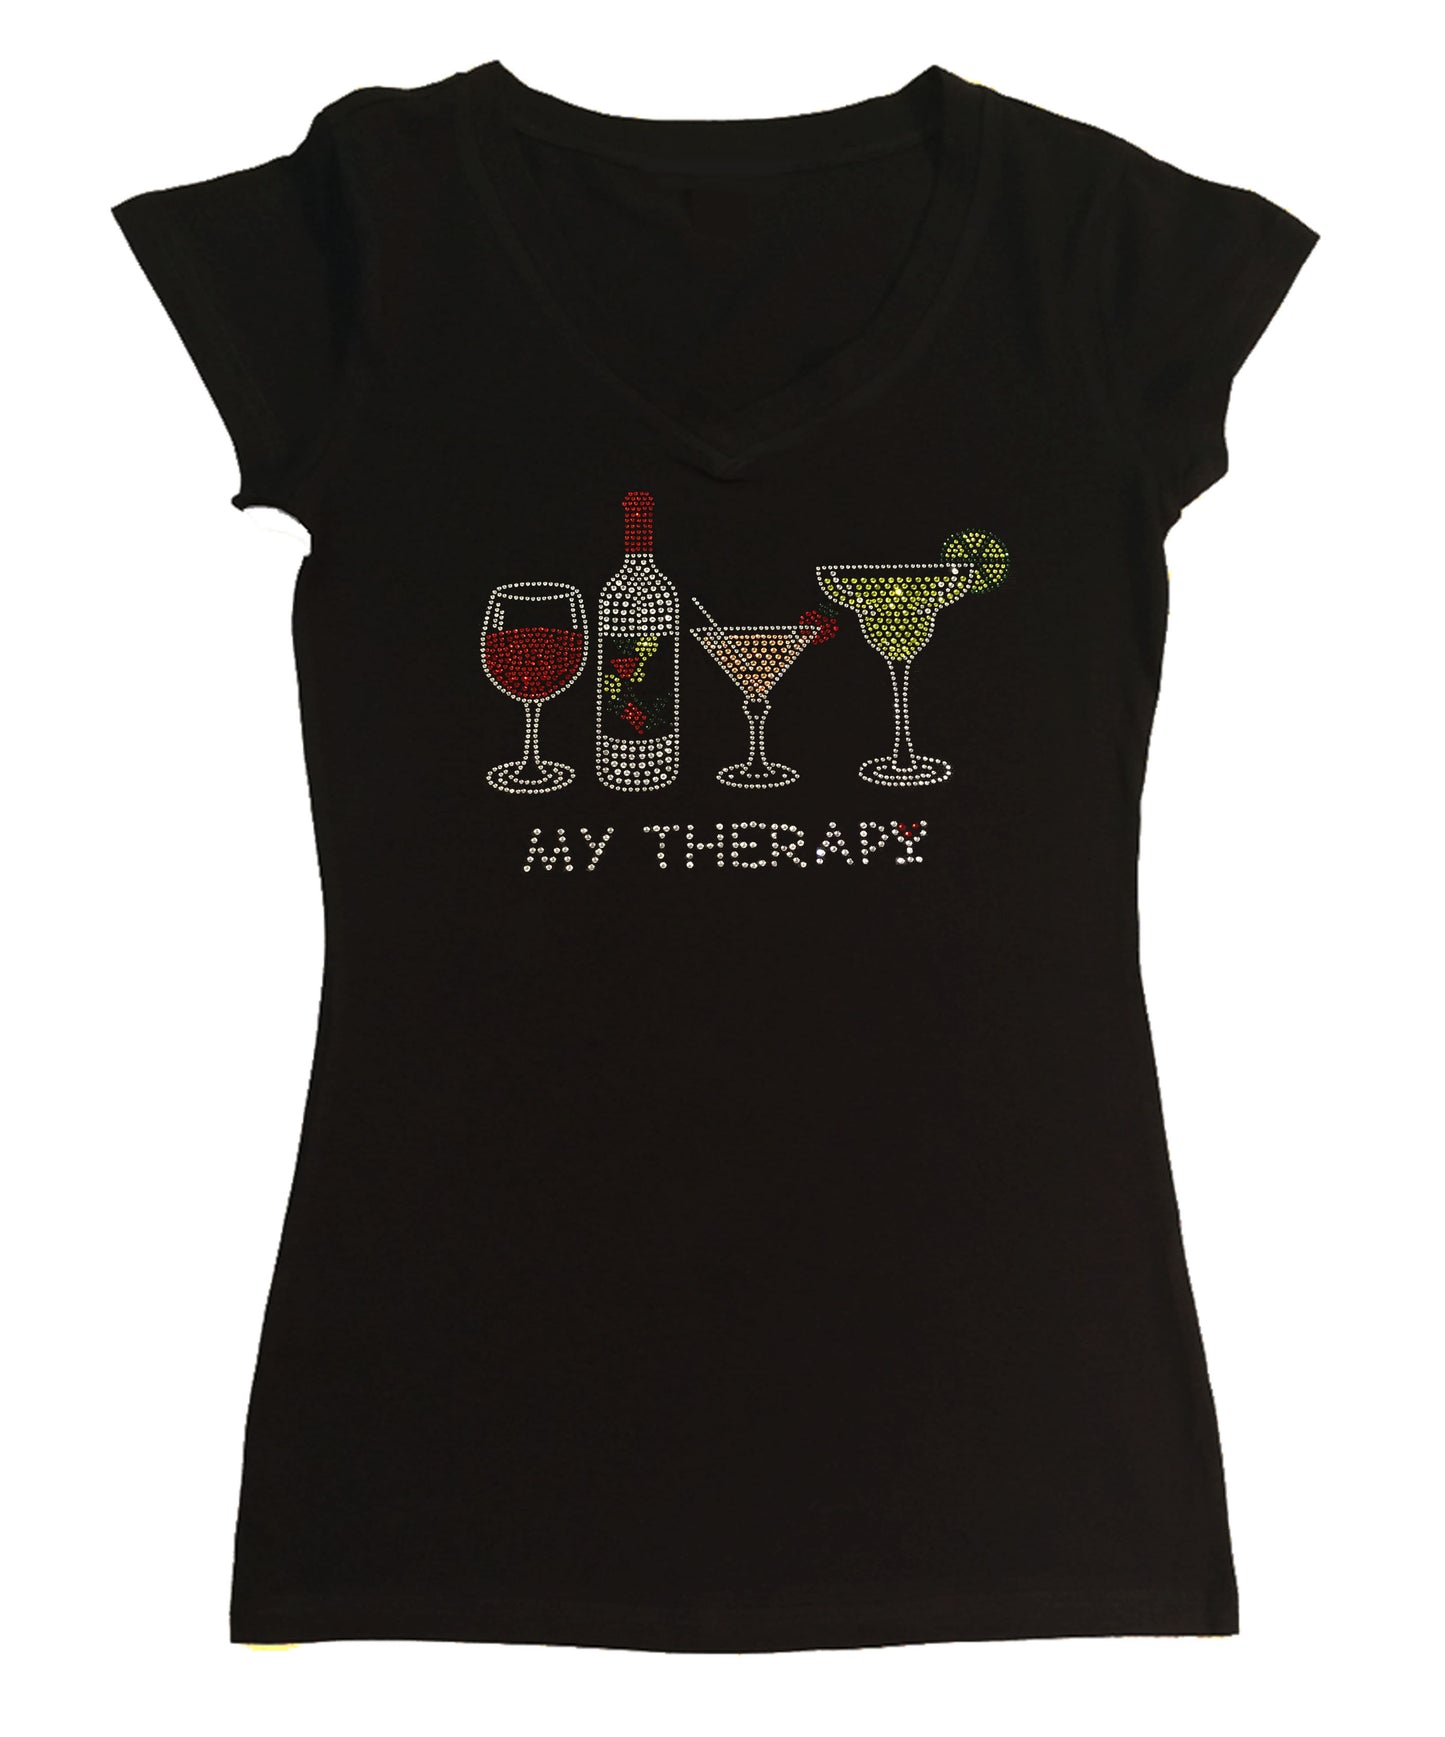 My Therapy - Wine Bottle - Drinks in Rhinestones